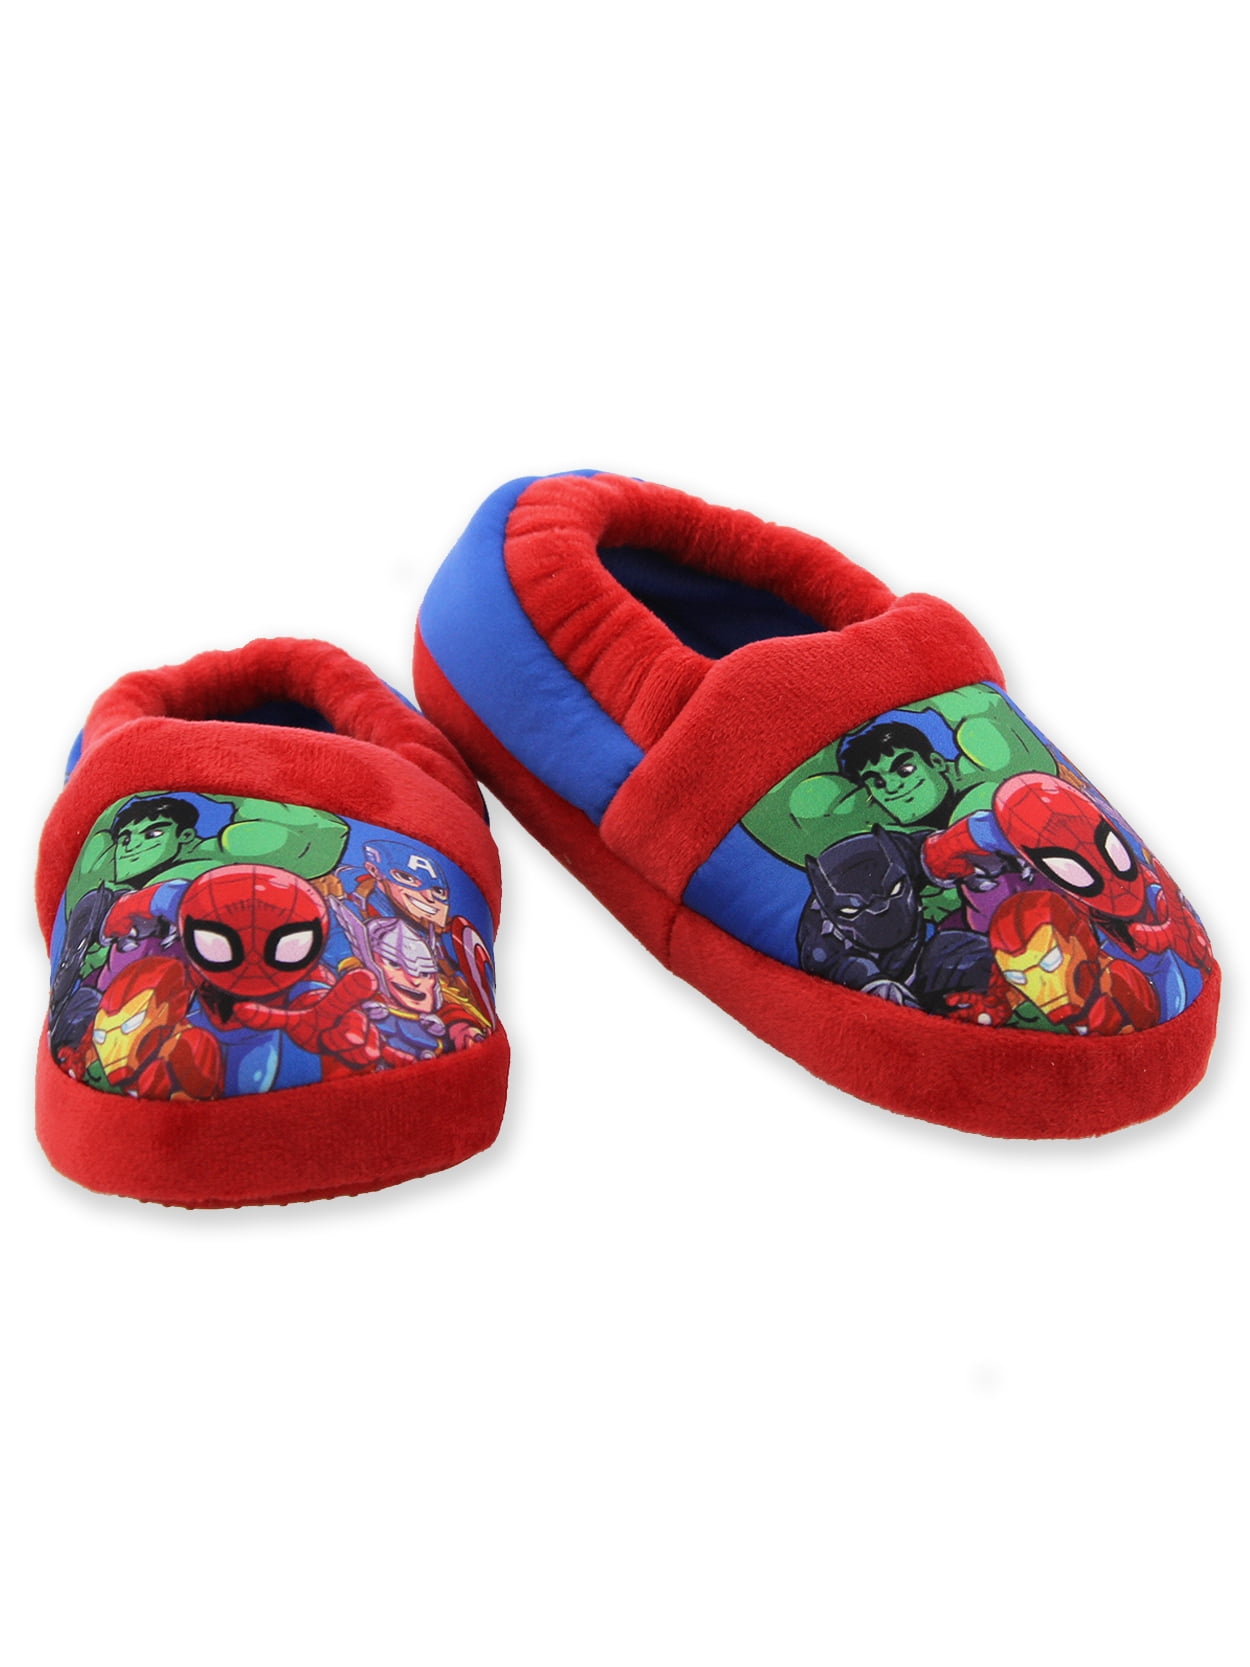 boys size 4 slippers